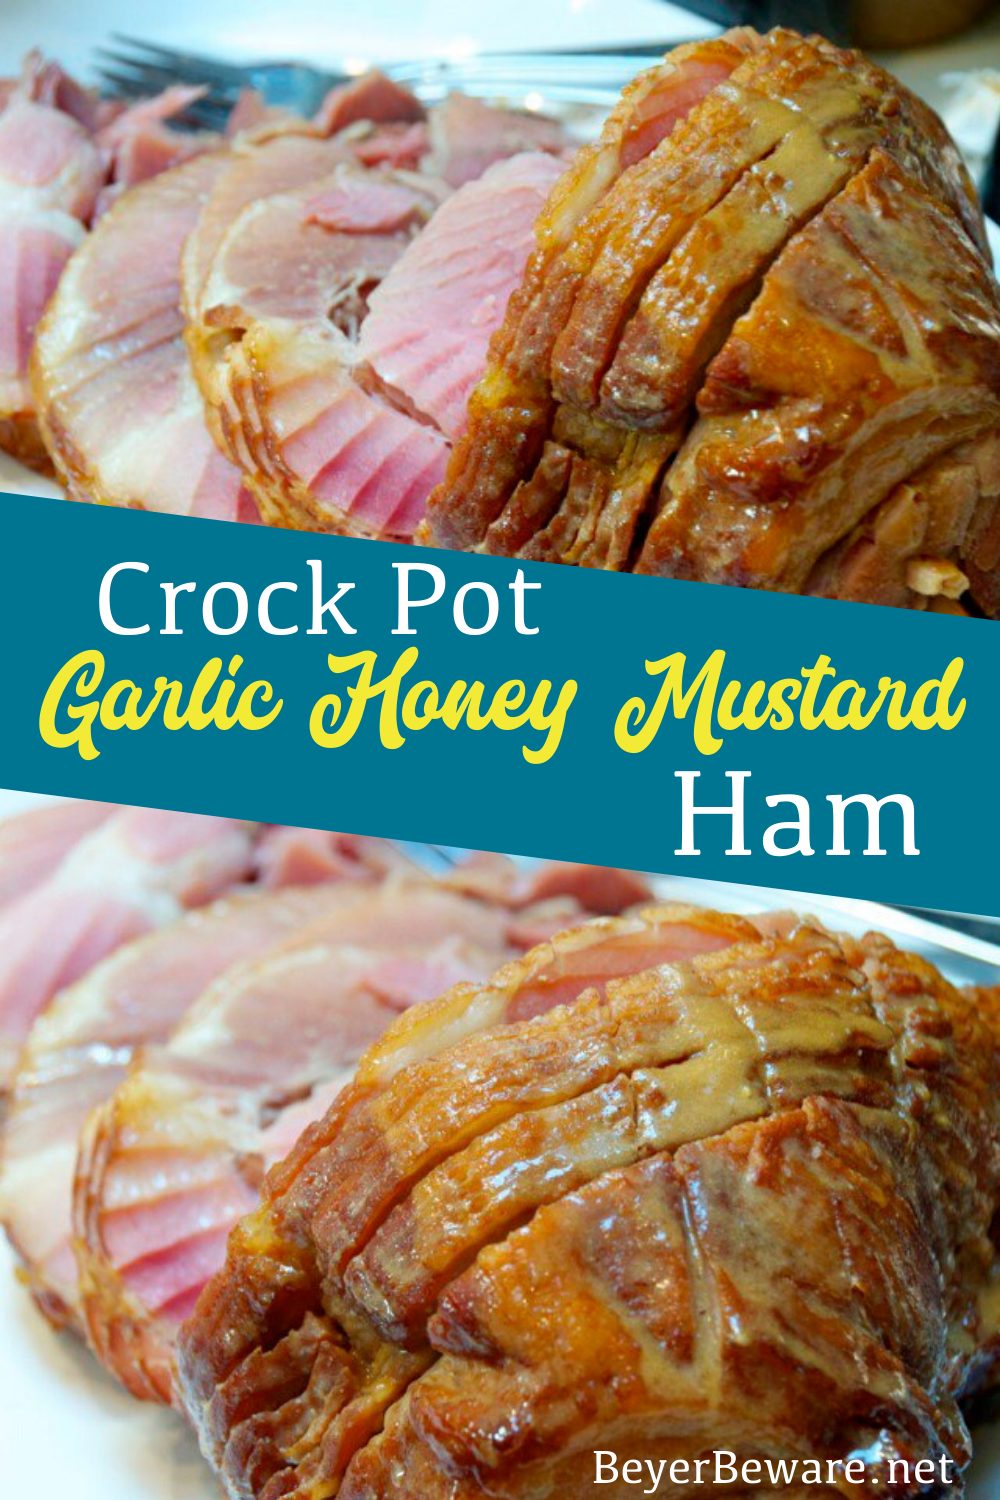 Crock Pot Garlic honey mustard ham prepared in the slow cooker is a savory ham with just a hint of sweetness from the honey. A perfect alternative for people looking for a ham recipe without pineapple.